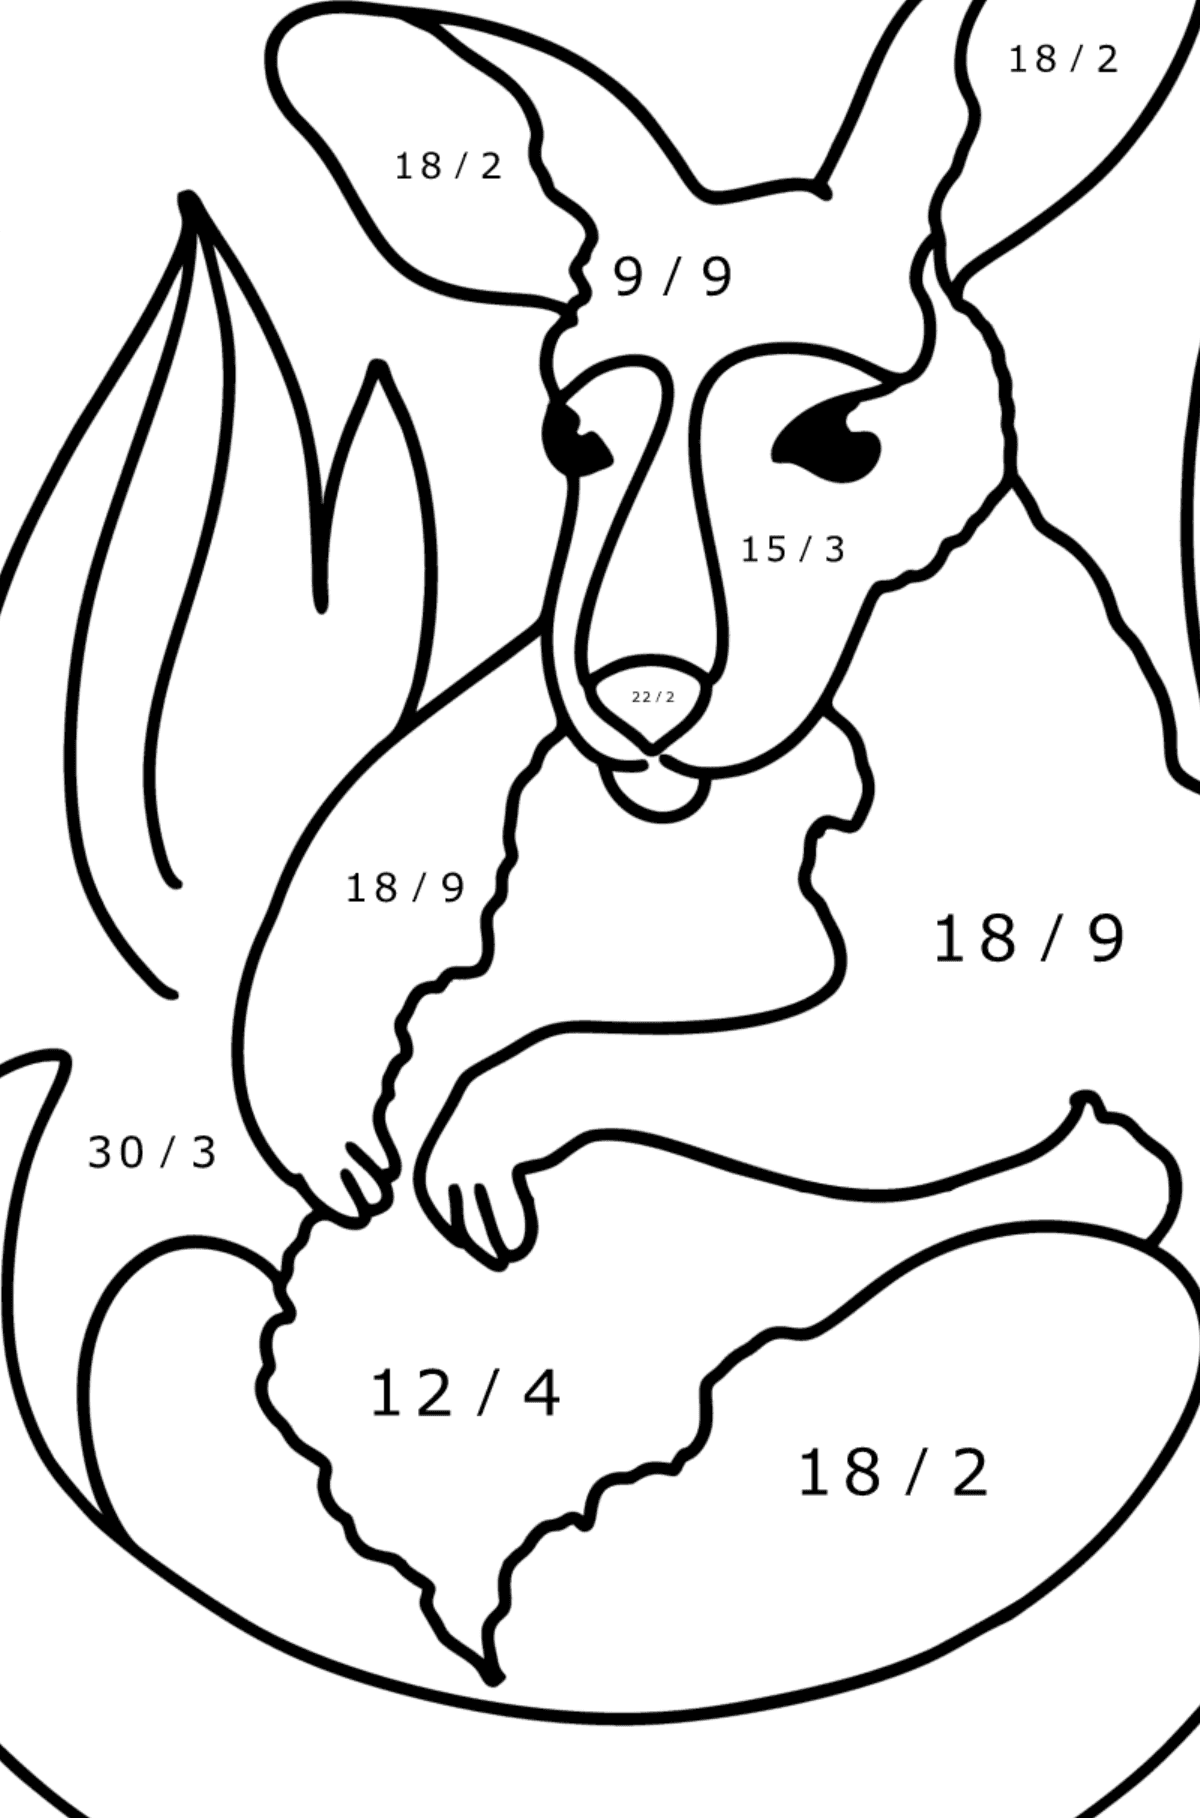 Coloring page - Adorable baby kangaroo - Math Coloring - Division for Kids